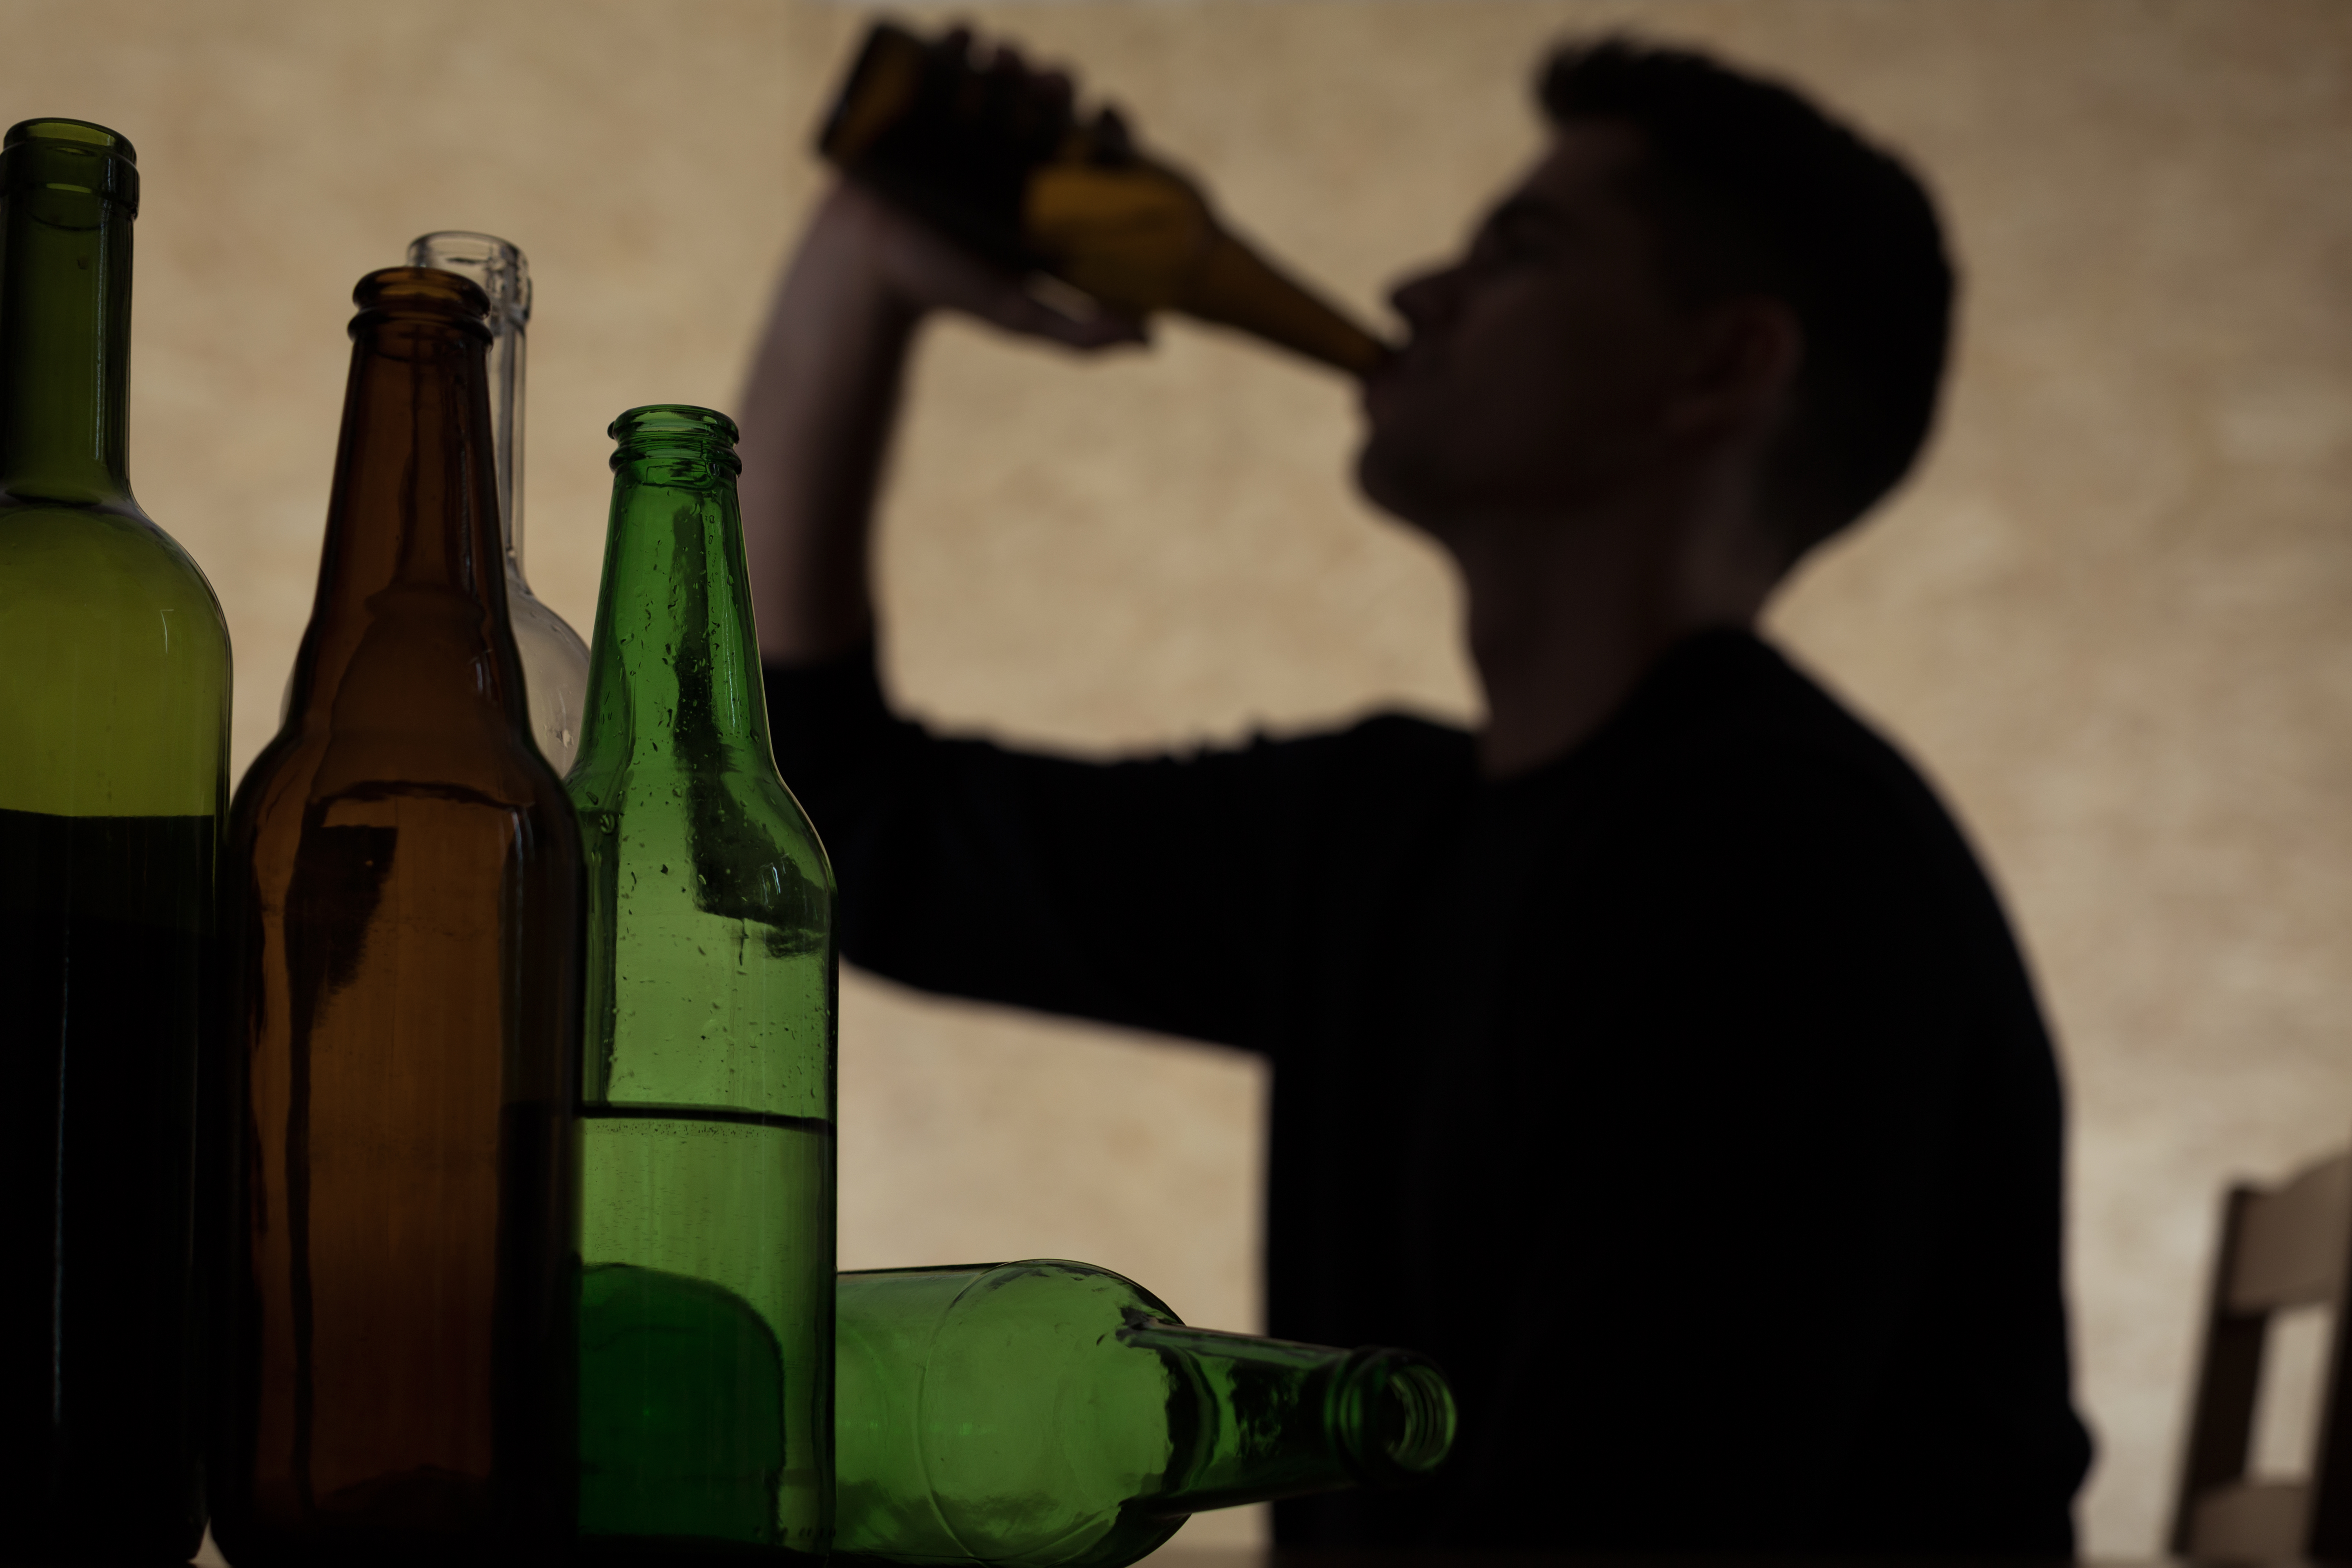 Adults who buy alcohol for underage drinkers could face jail